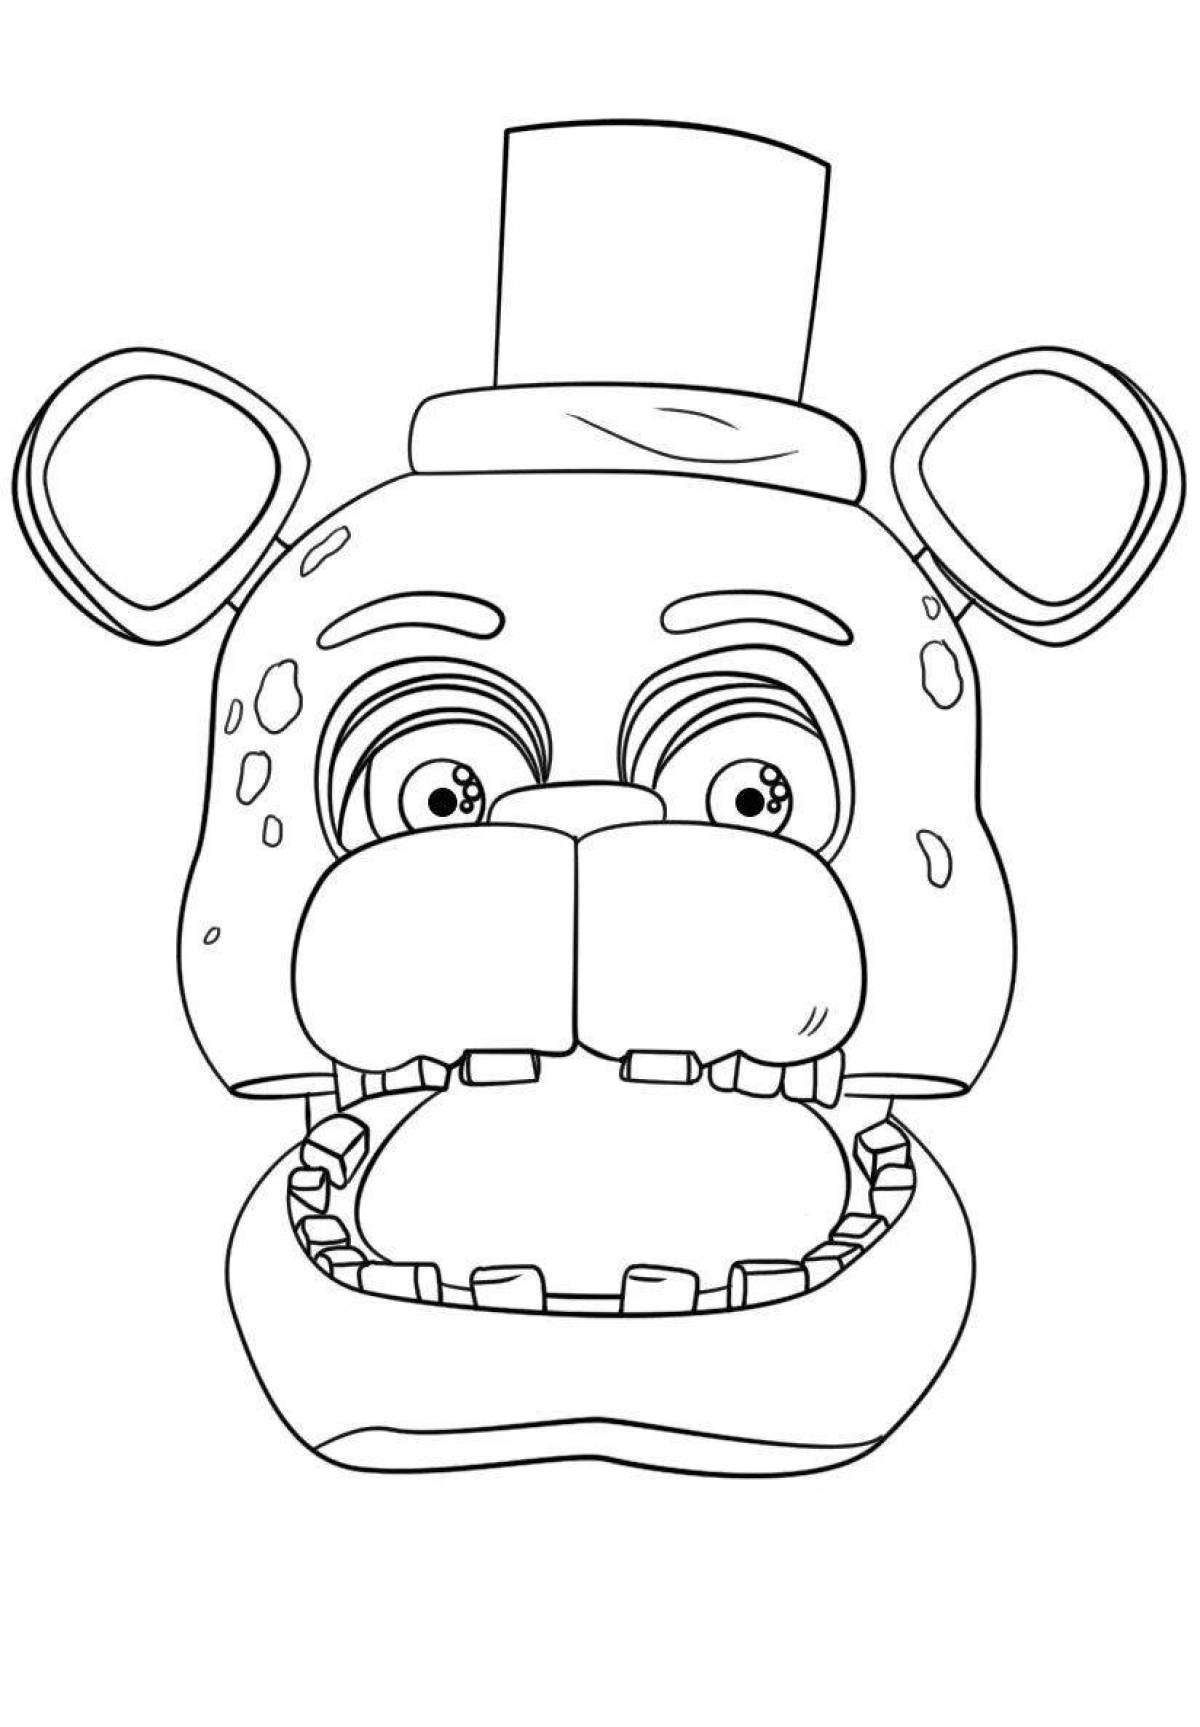 Animated fnaf head coloring page